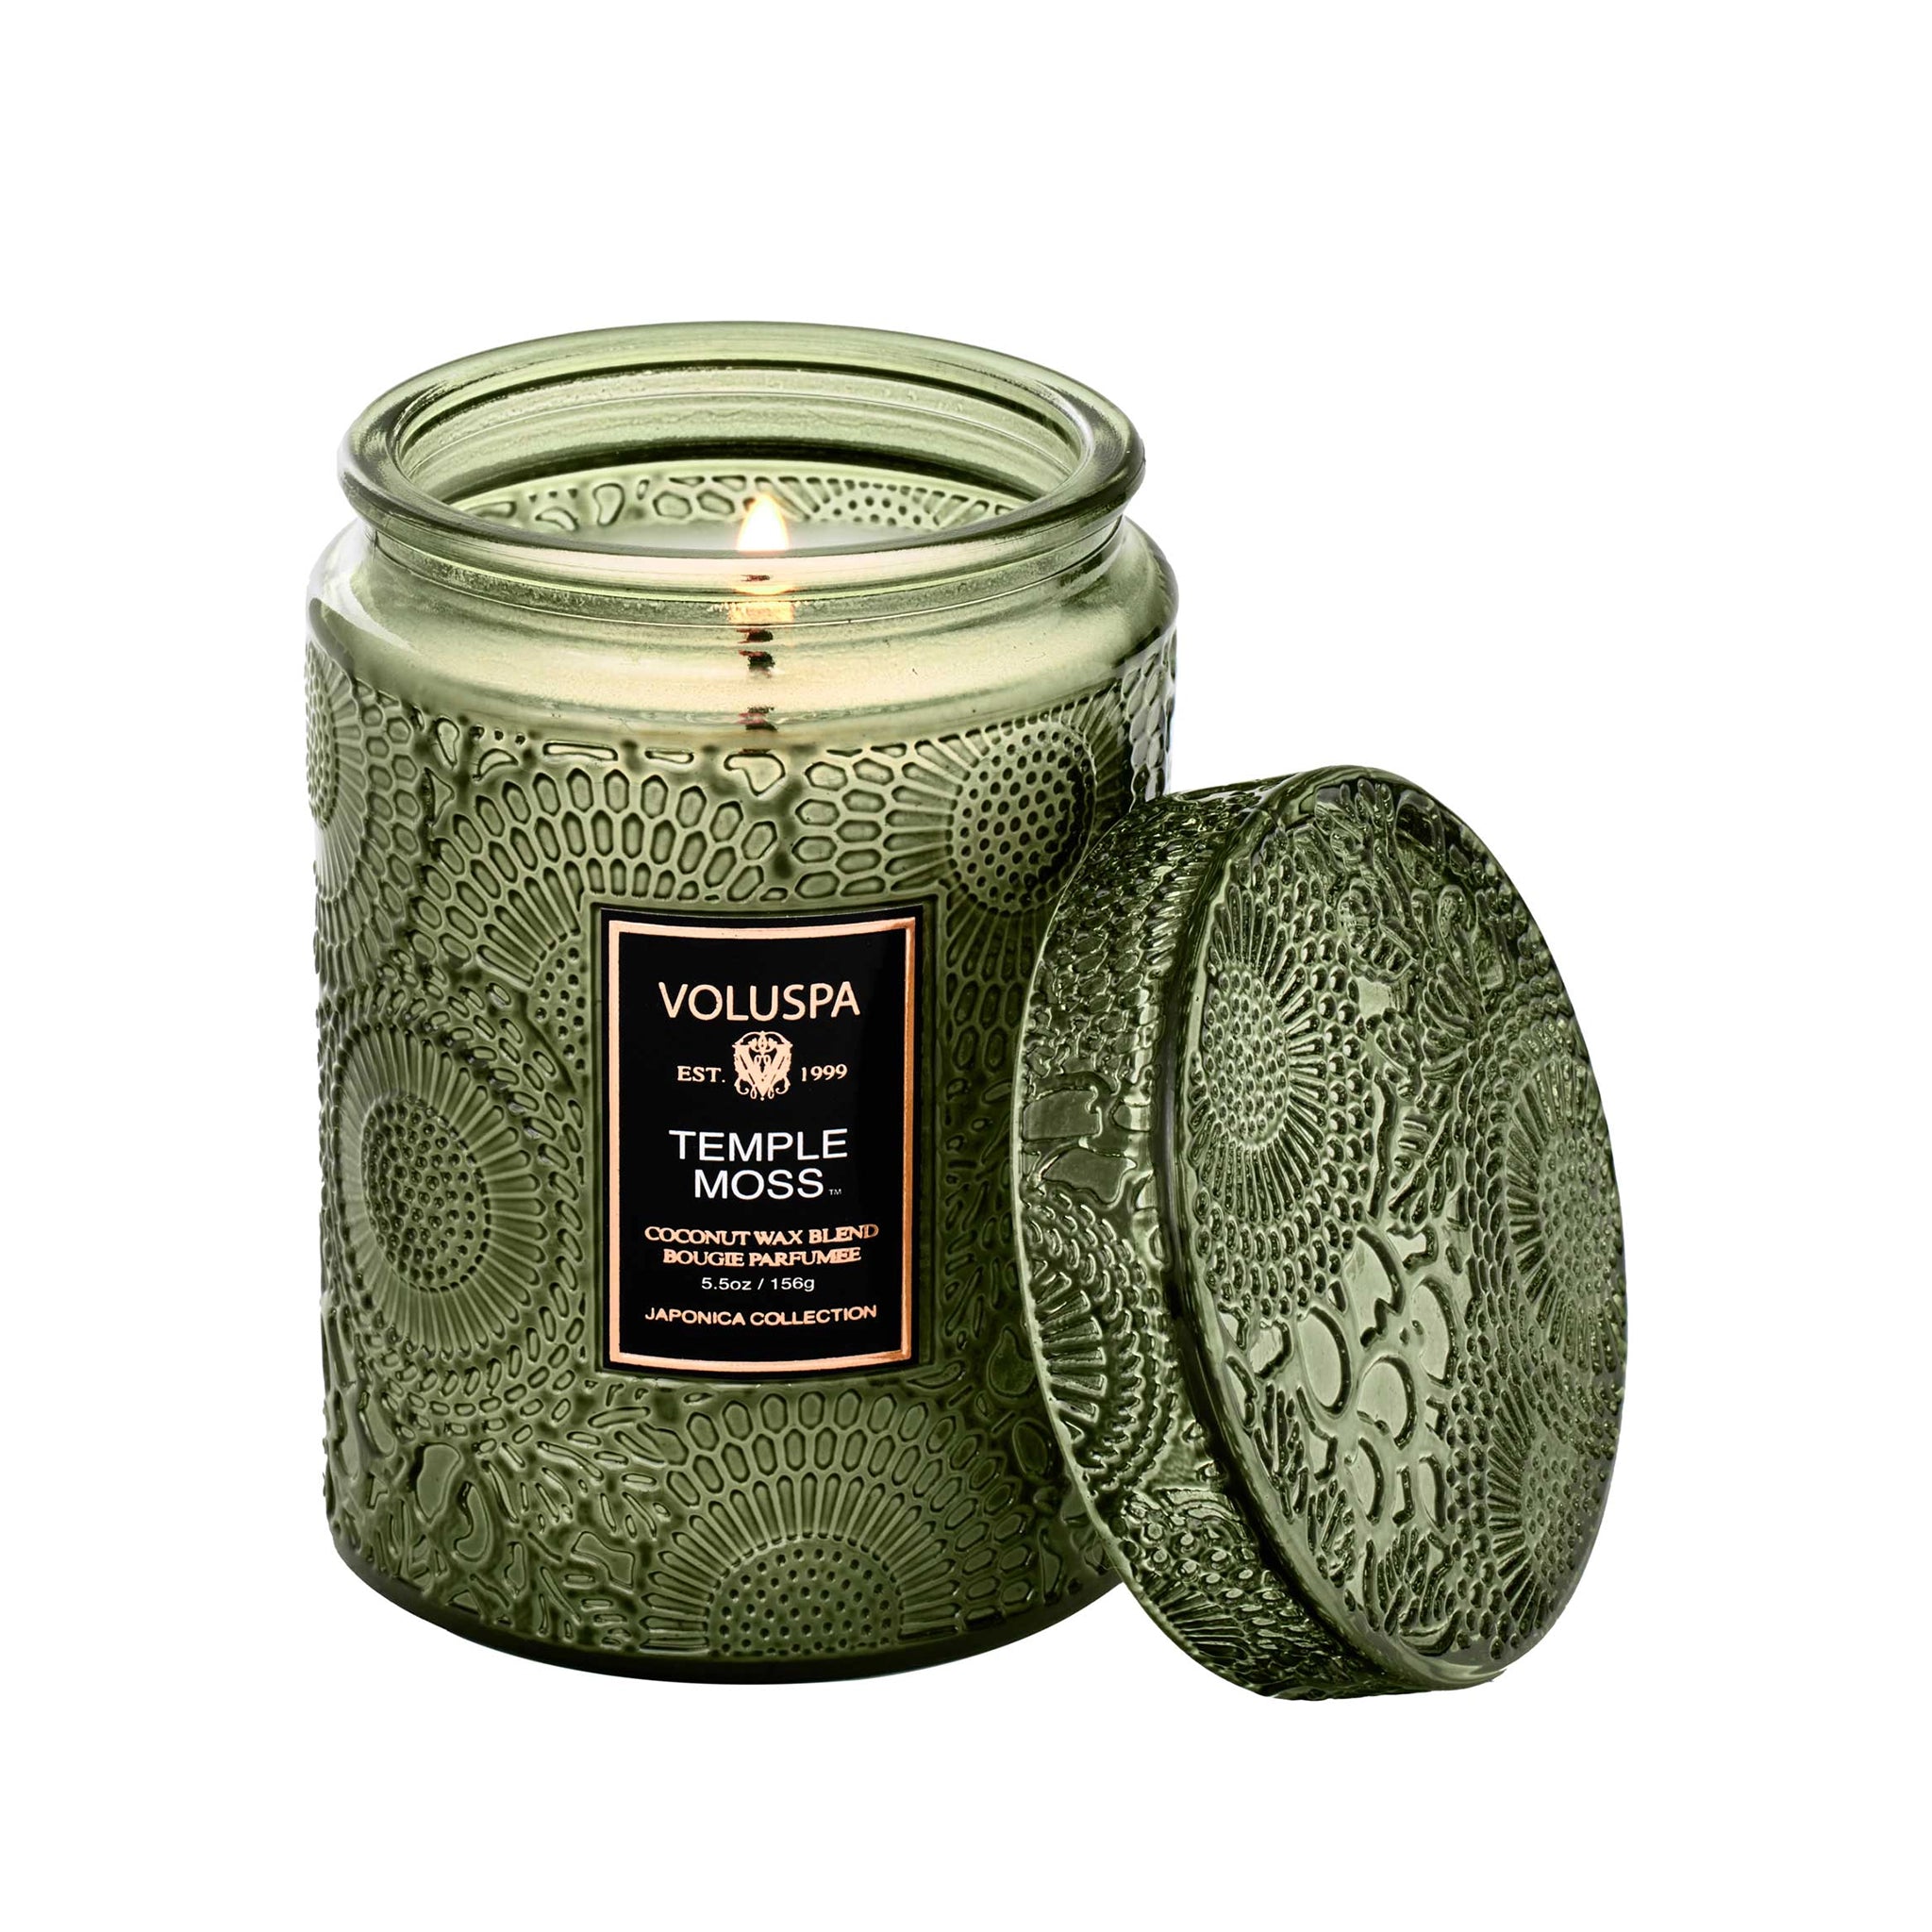 On a white background is a green decorative jar candle with a black label in the center that reads, "Voluspa Temple Moss".